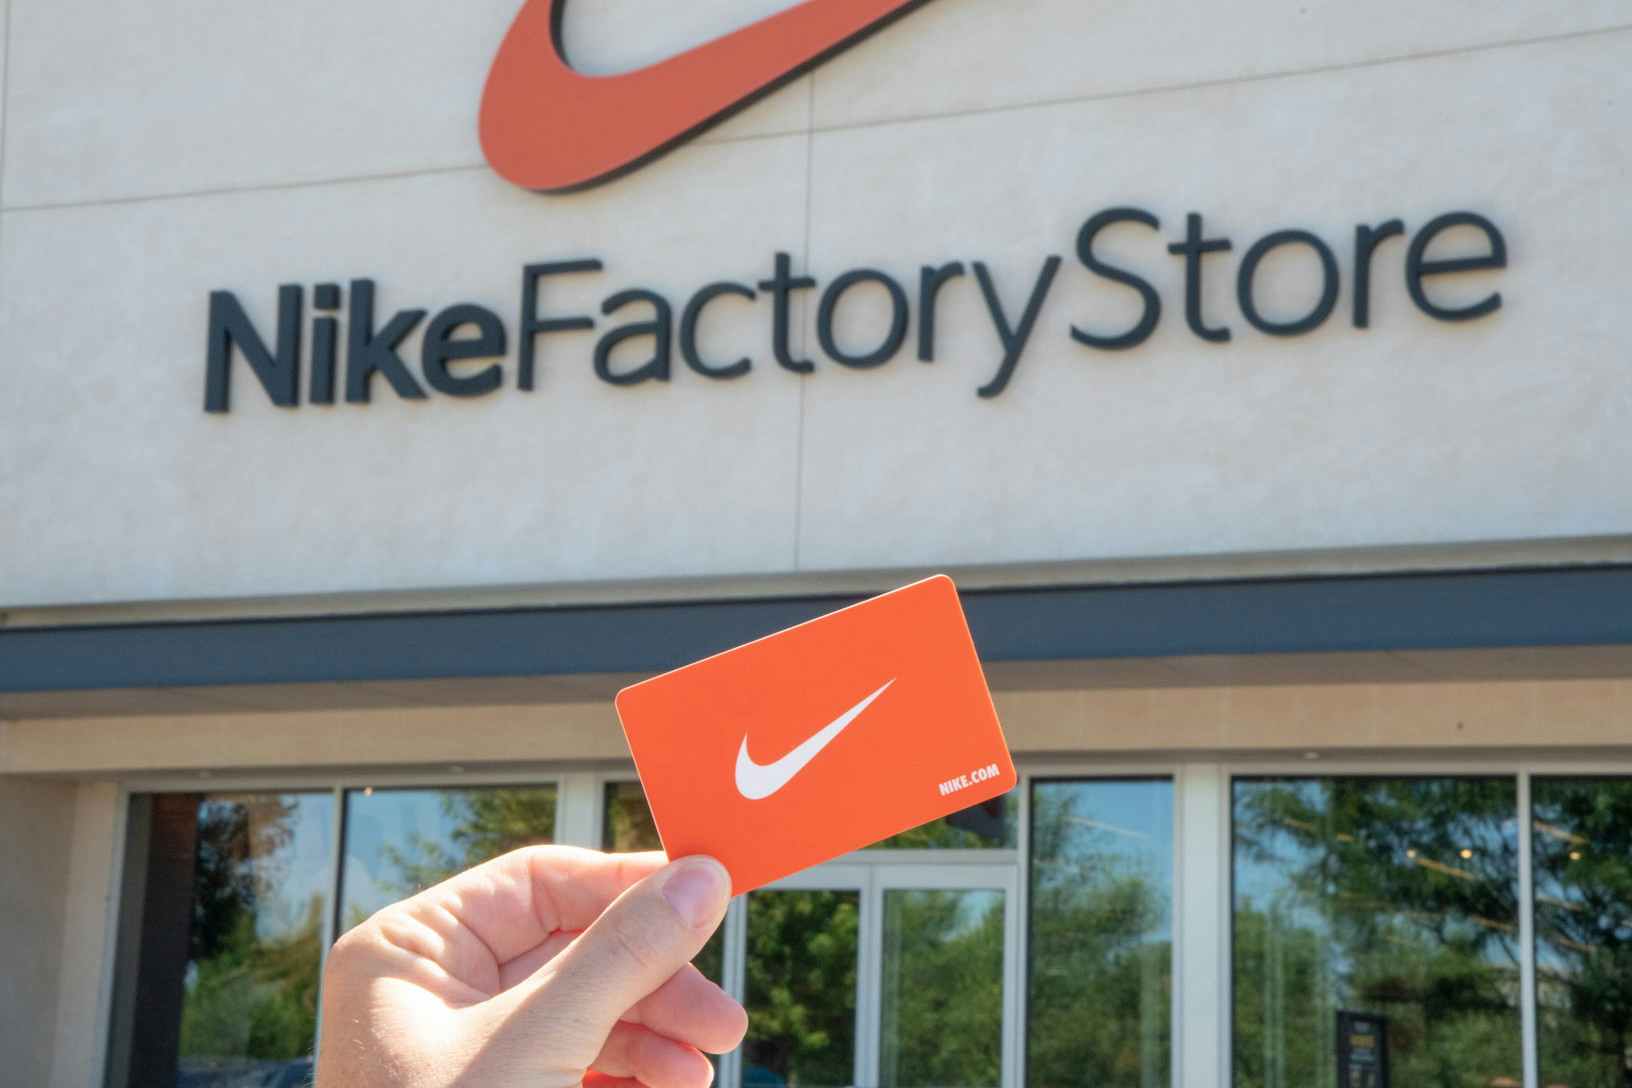 A person's hand holding up an orange Nike gift card in front of a Nike Factory Store storefront.